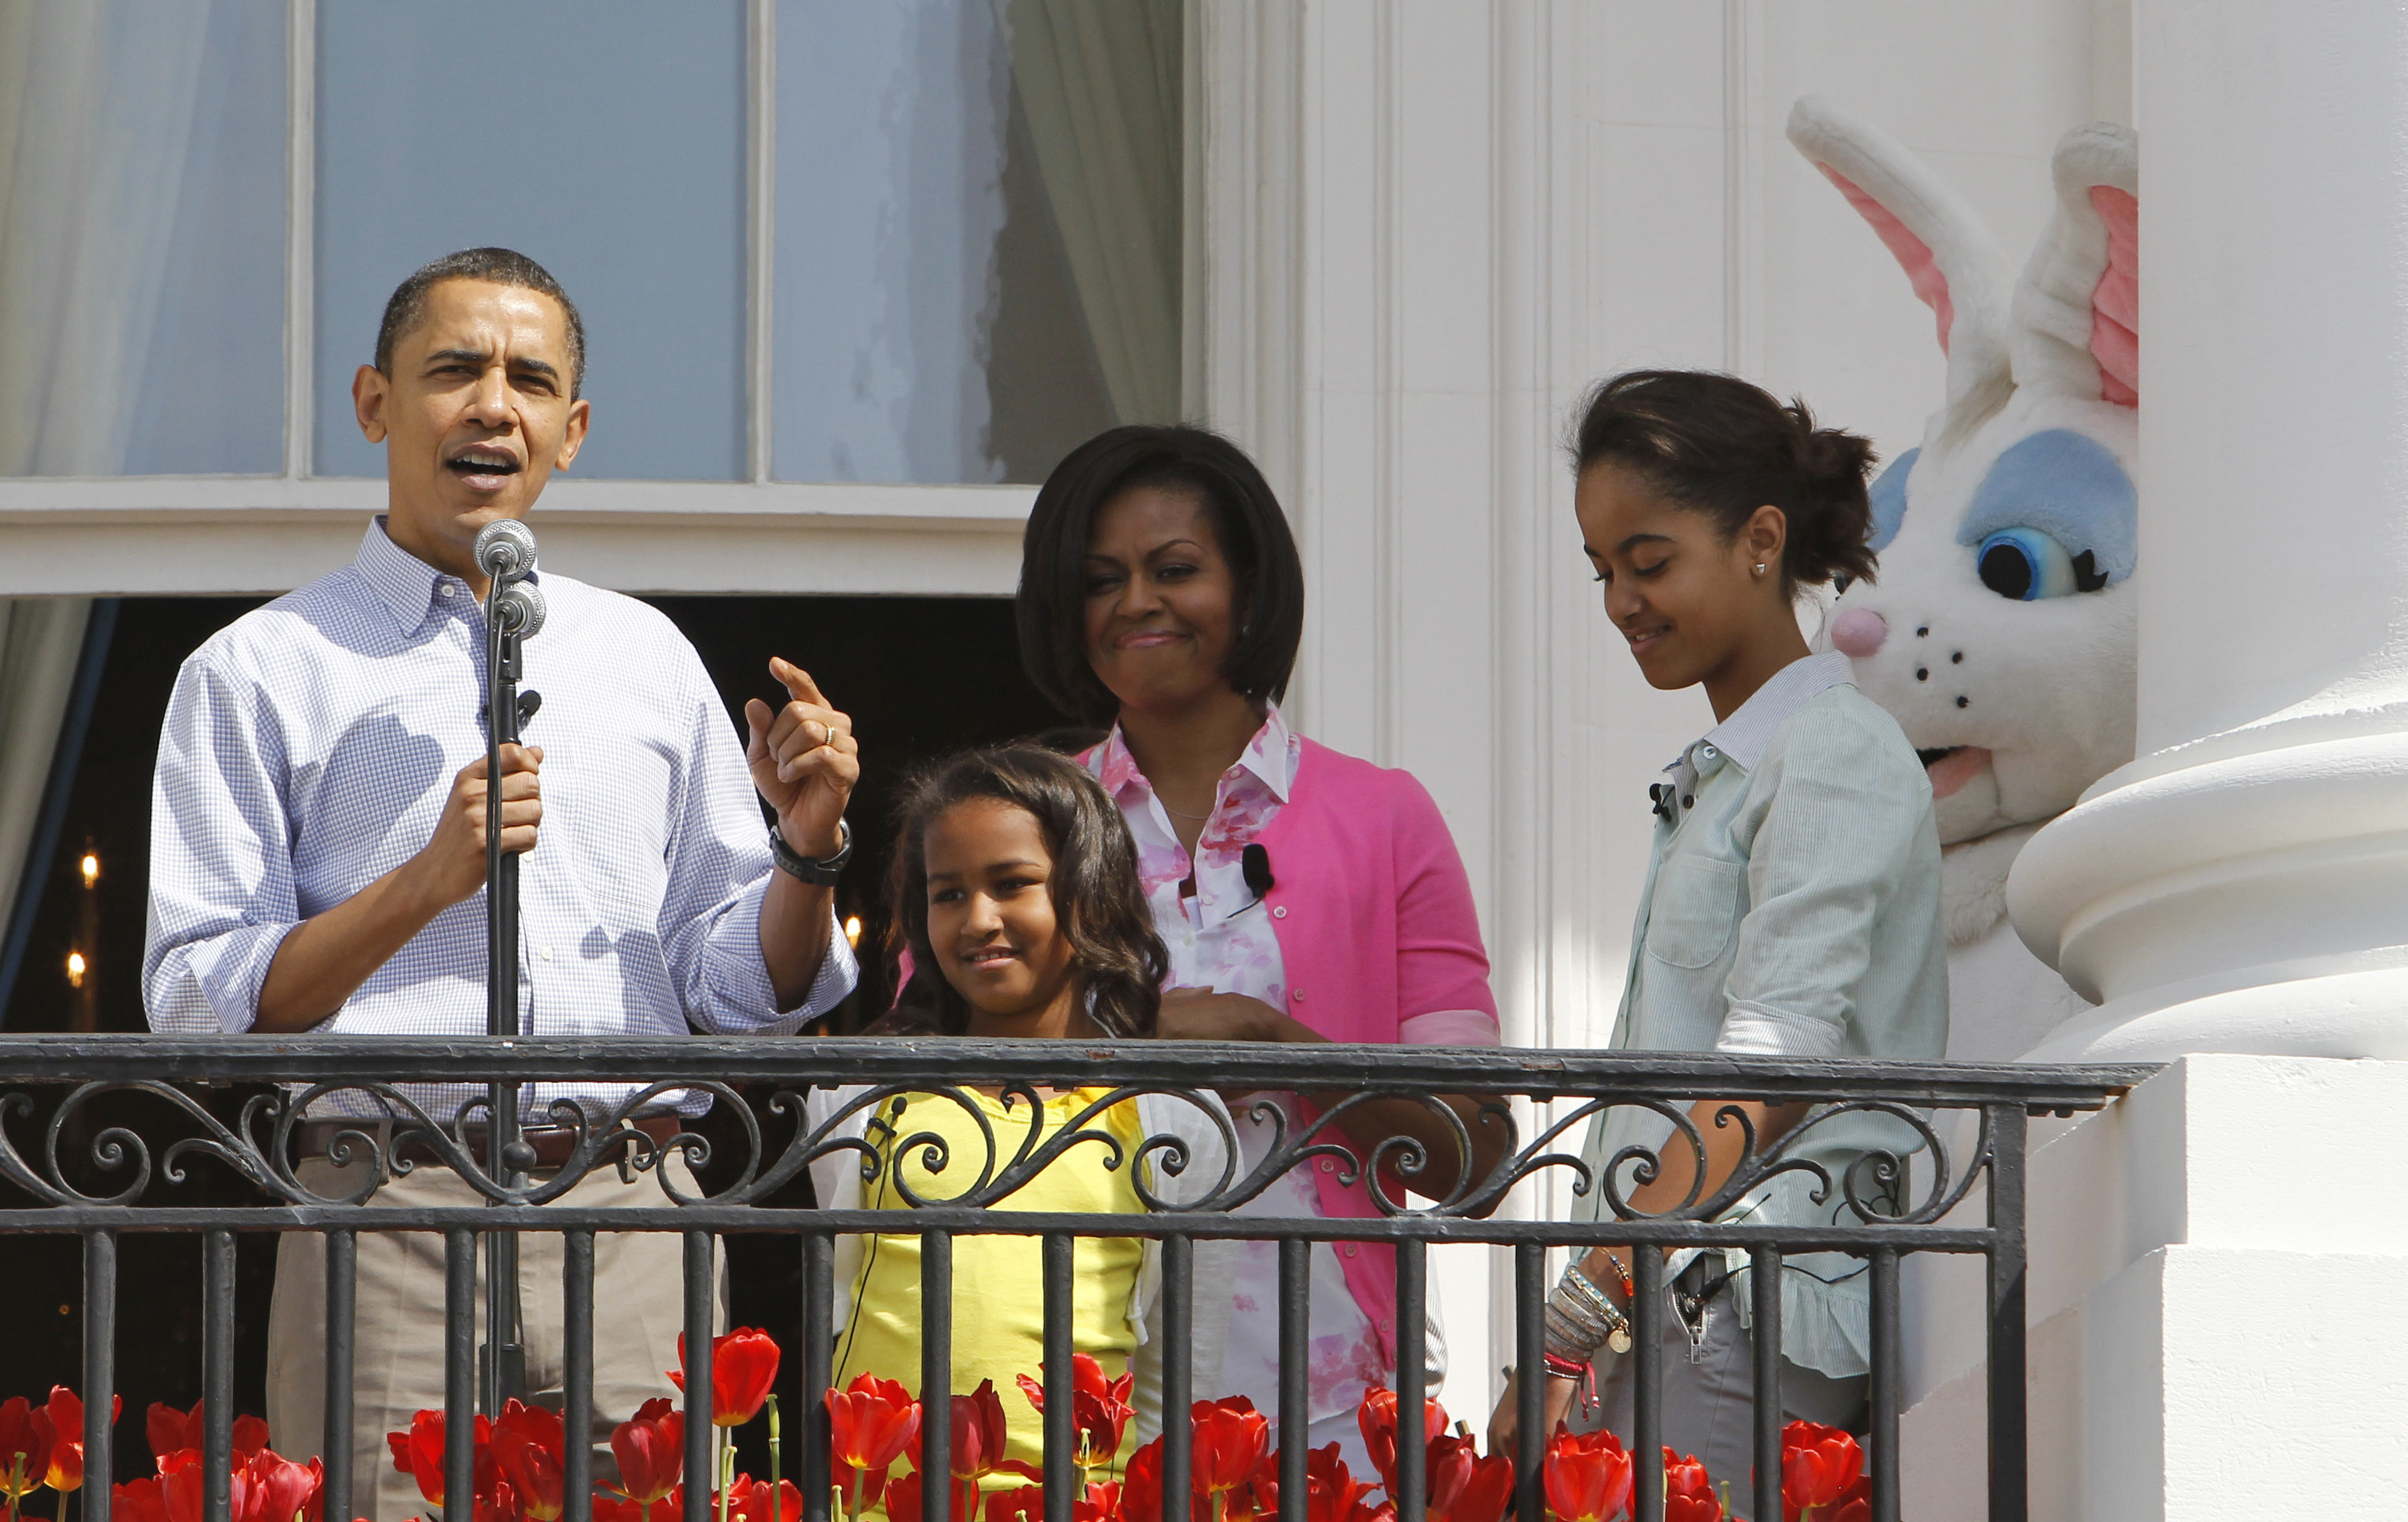 The Obama family is seen on a White House balcony next to ABBA Bunny